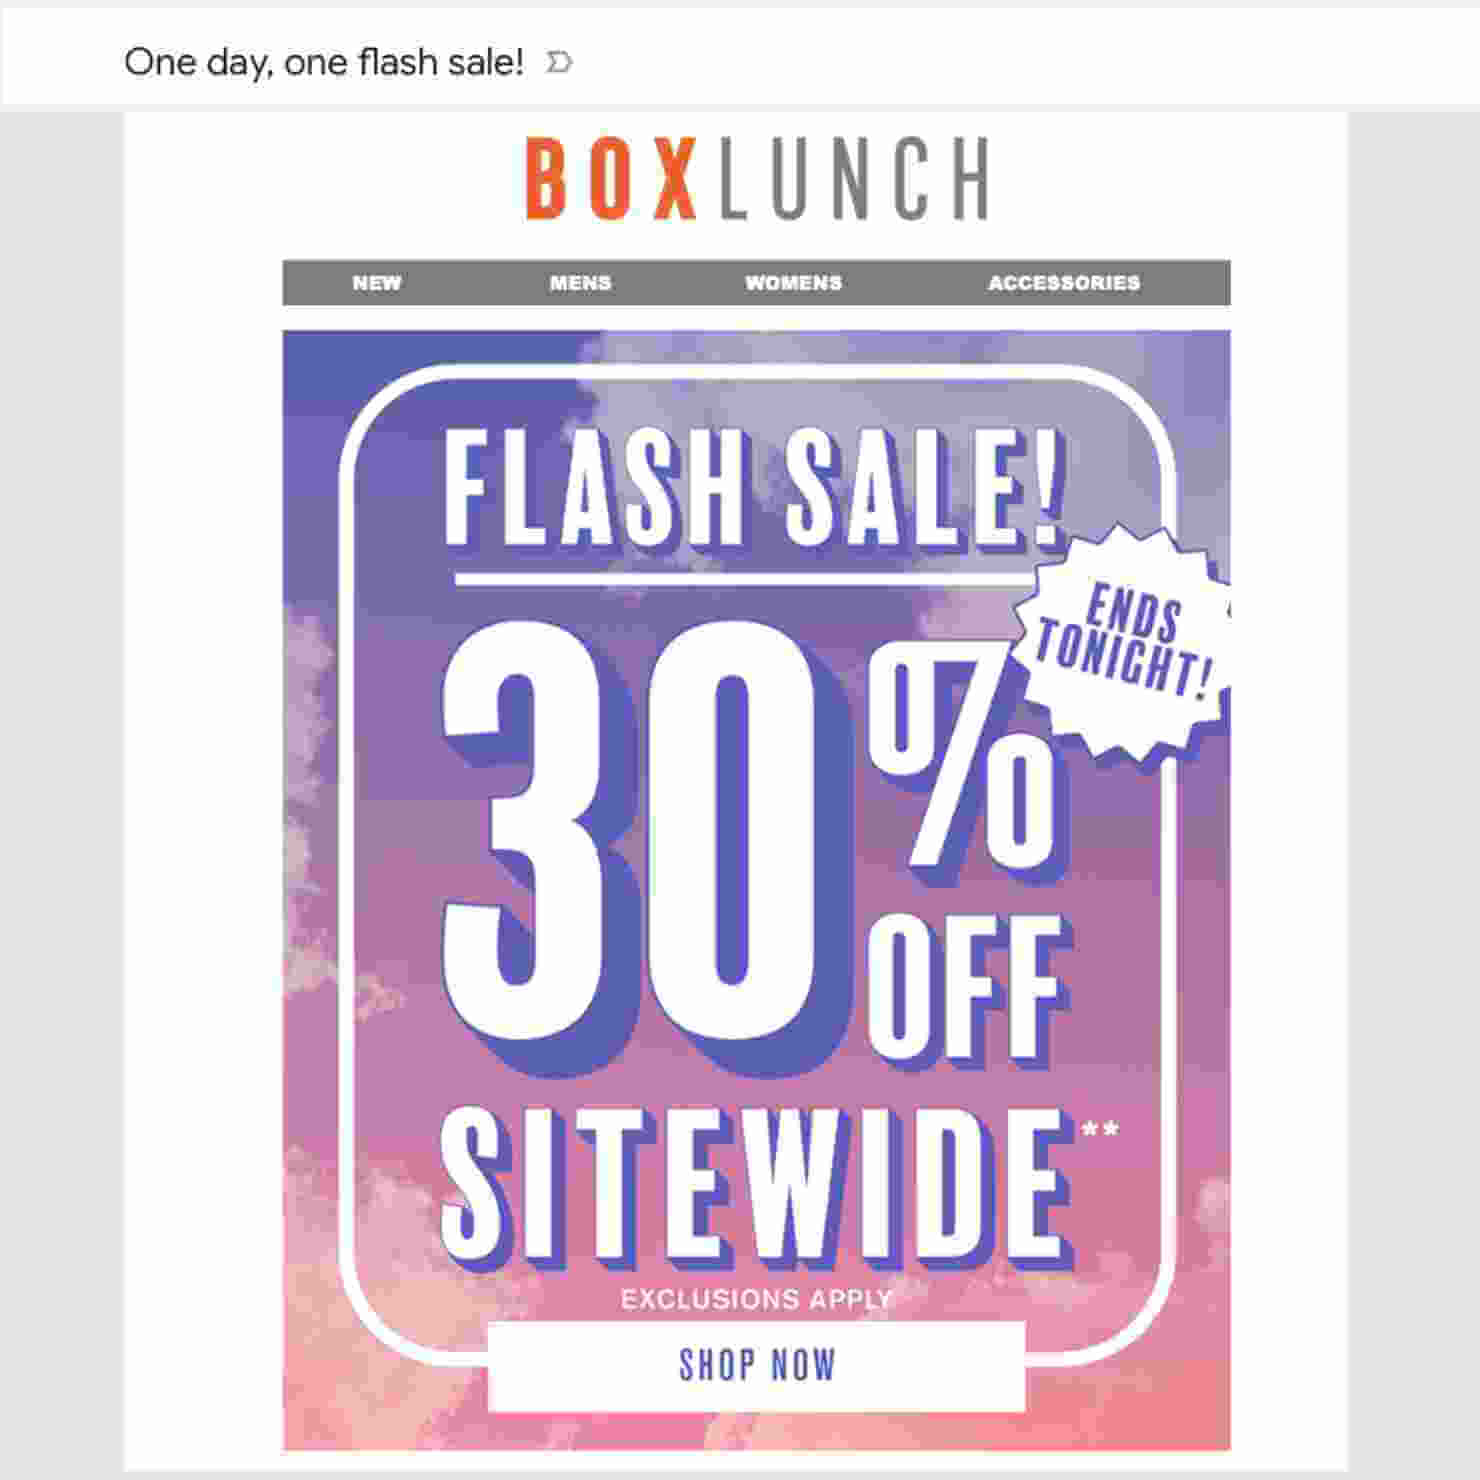 Email from BoxLunch. Subject line says "One day, one flash sale." Email content says "FLASH SALE! 30% Off Sitewide. Ends Tonight! Call-to-action button says "Shop now"